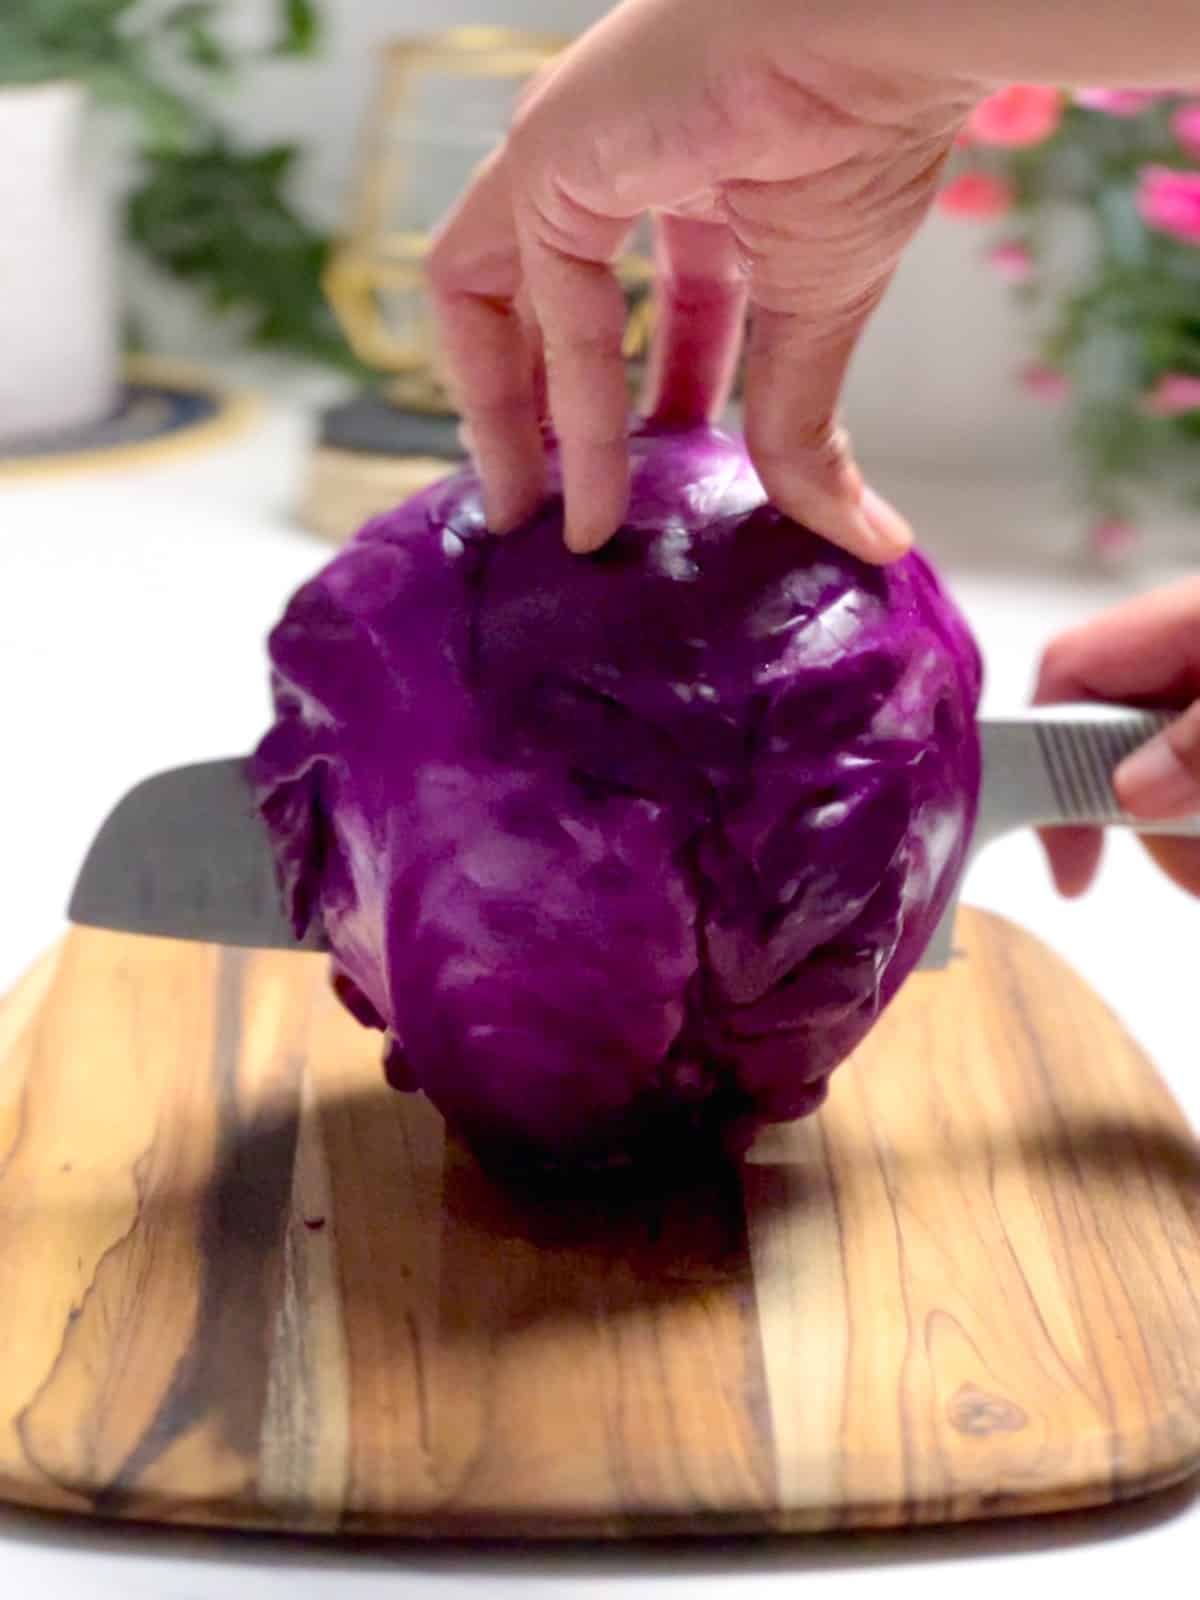 cutting a whole head of purple cabbage into two halves